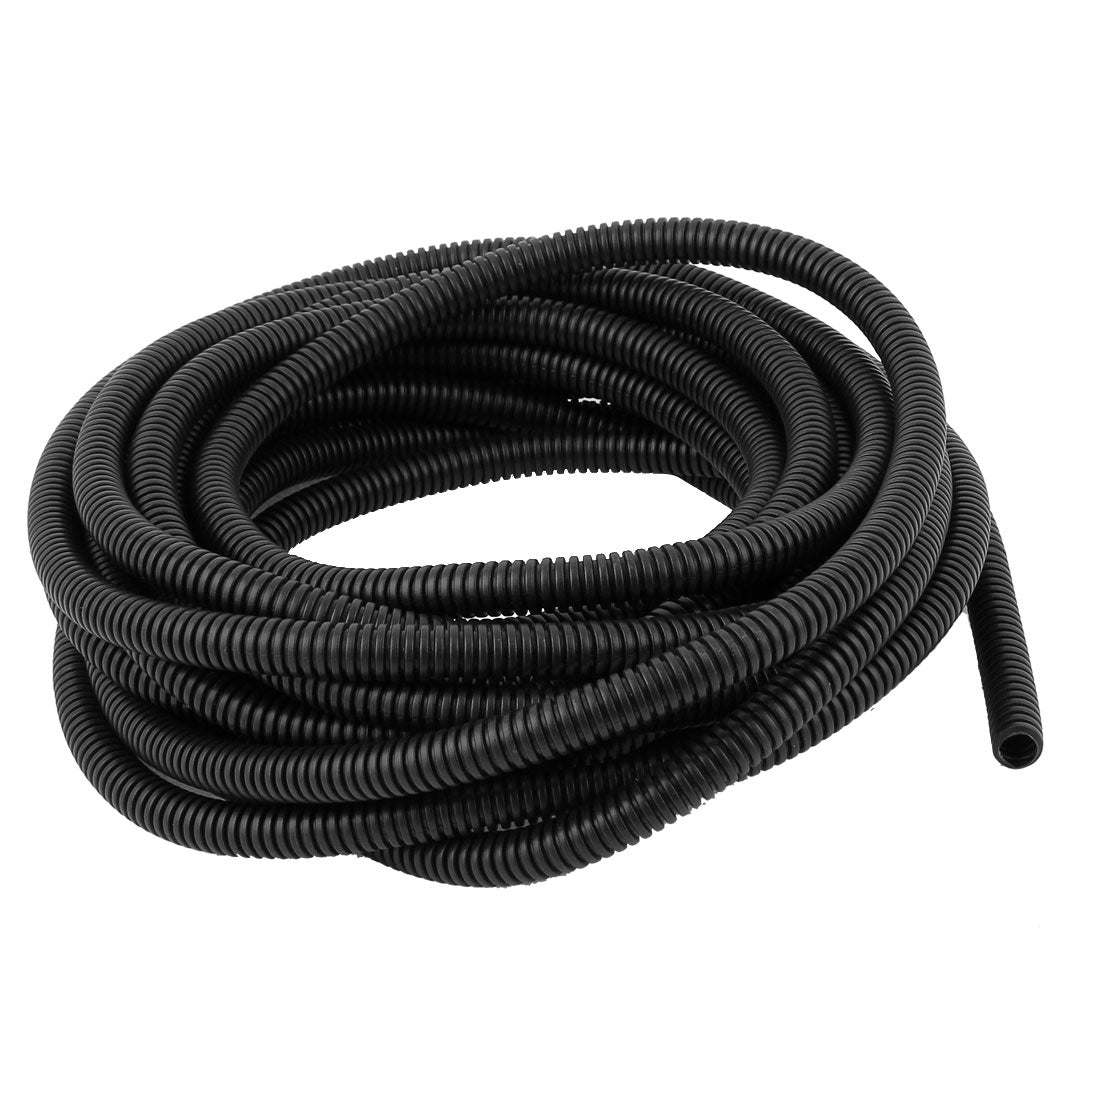 uxcell Uxcell 8 M 9 x 12 mm Plastic Flexible Corrugated Conduit Tube for Garden,Office Black